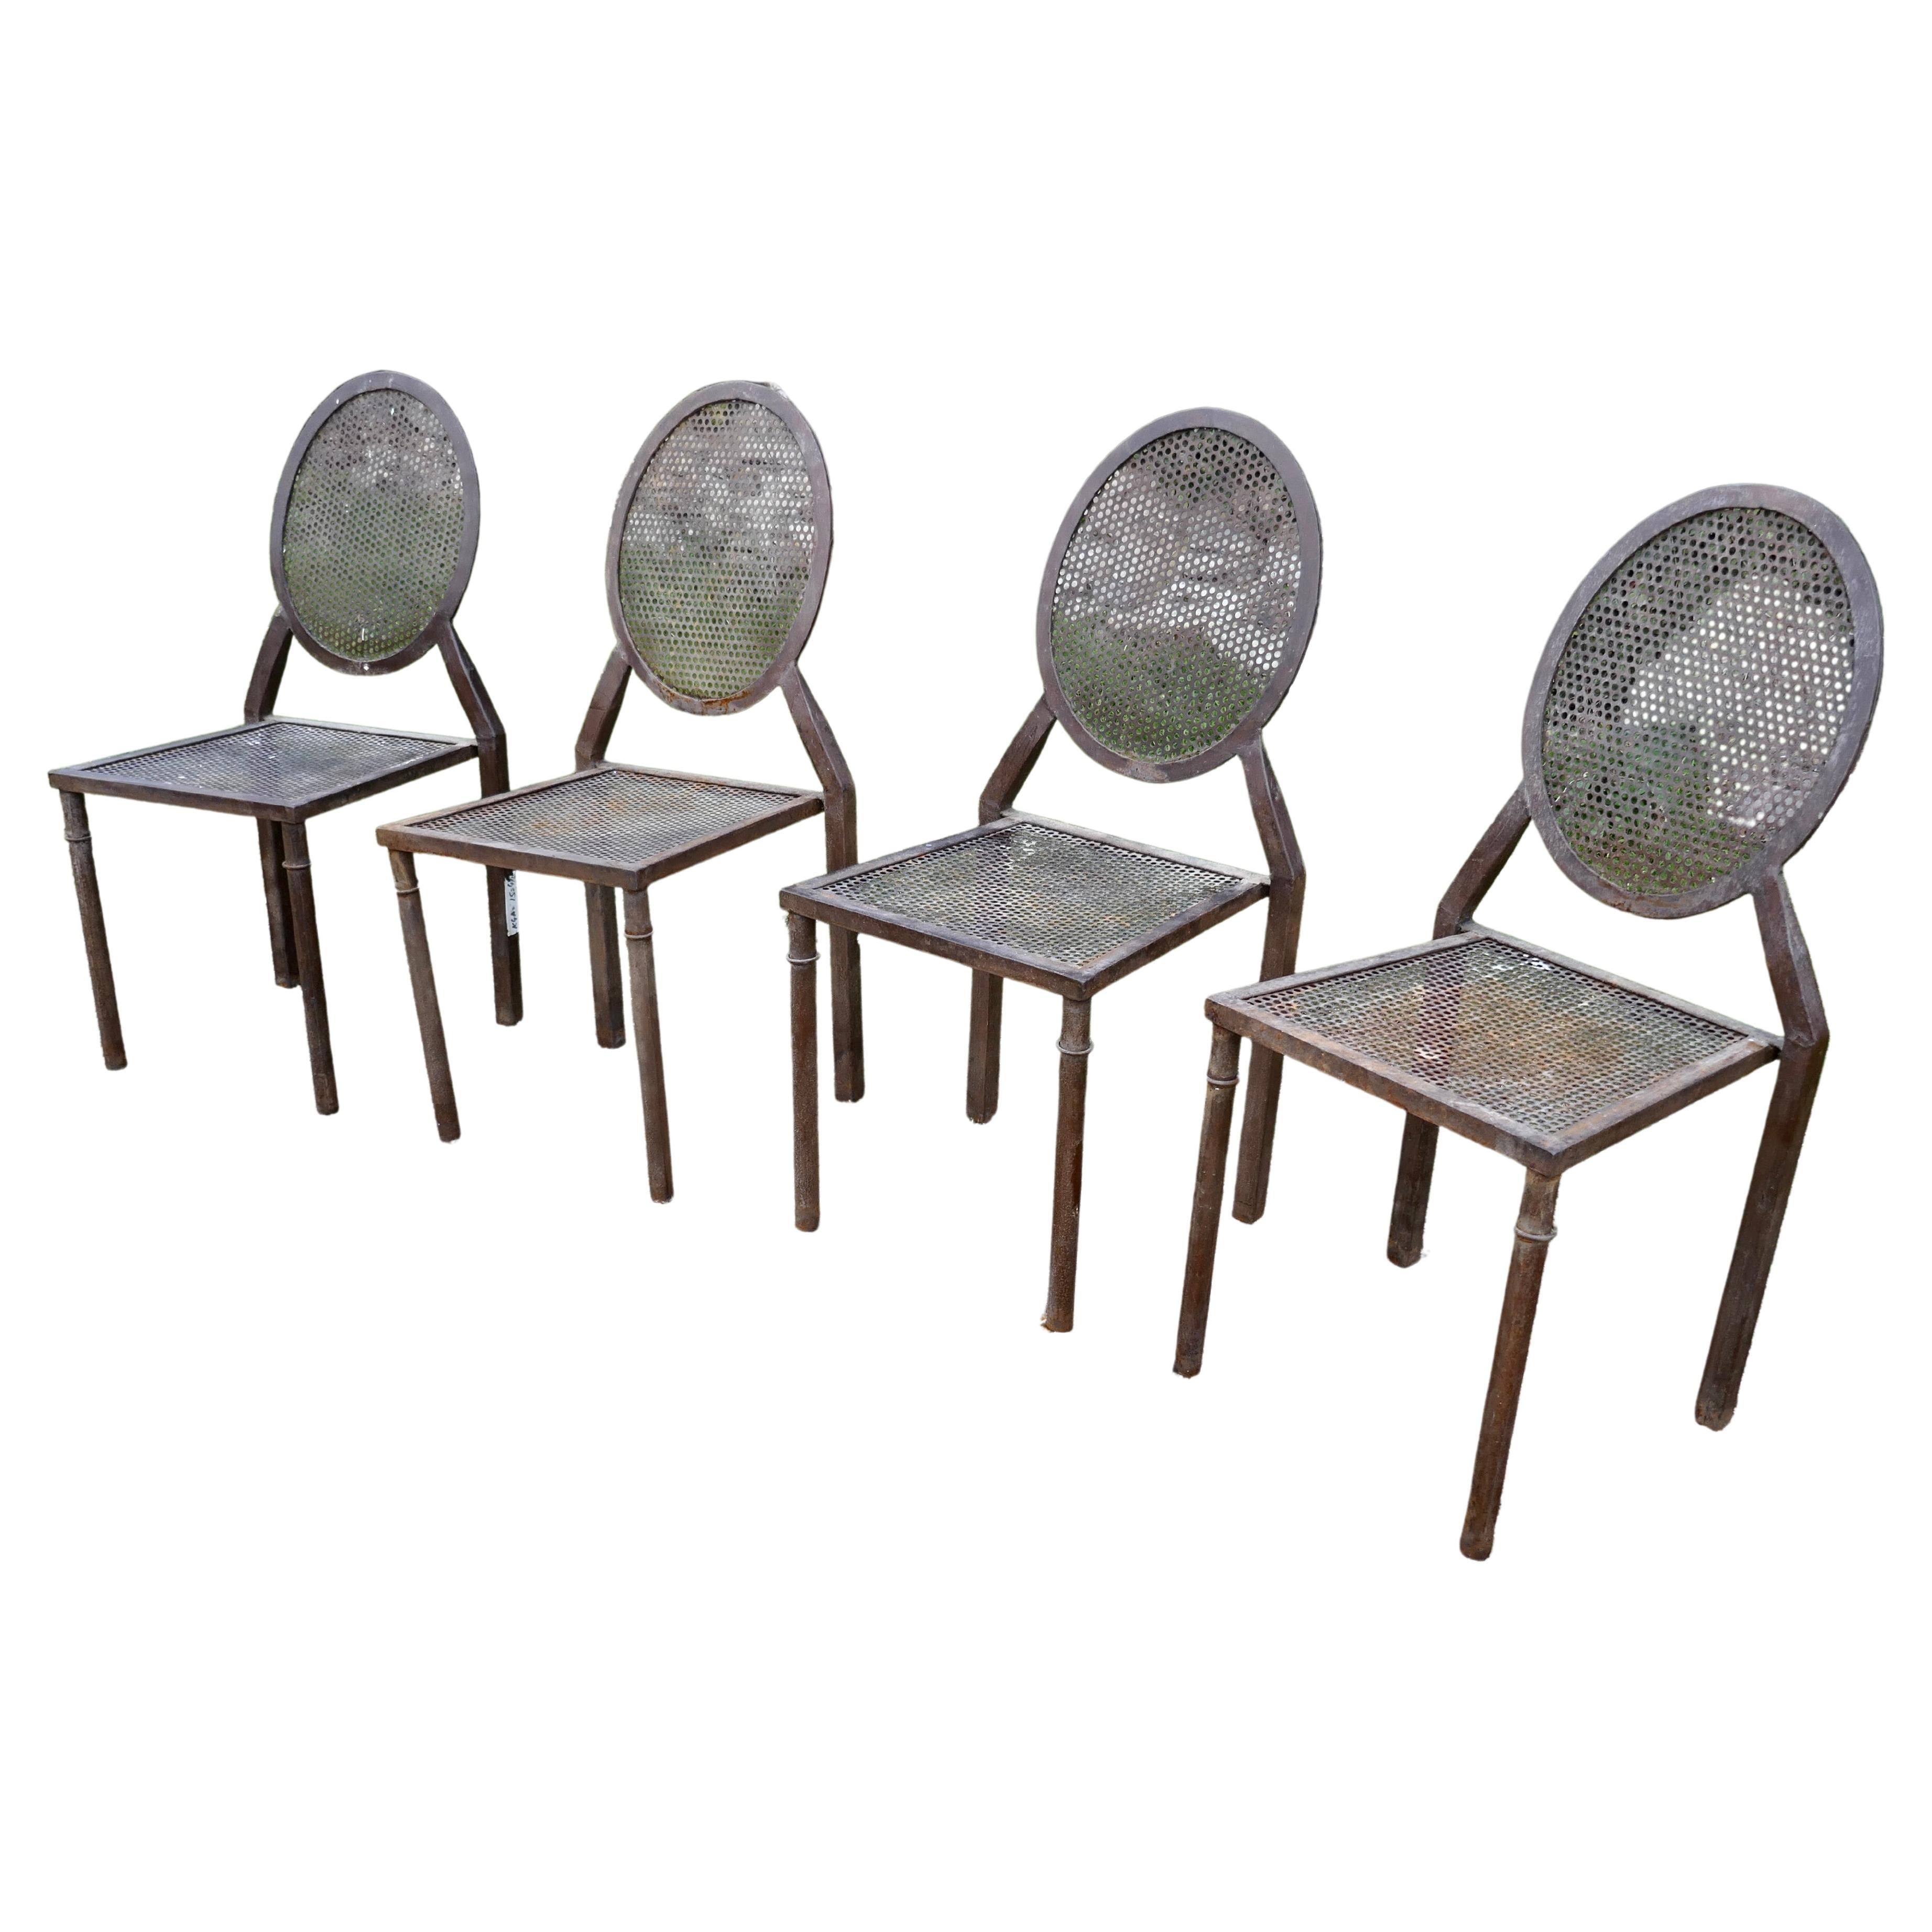 Set of 4 Brutalist Iron Stacking Dining Chairs